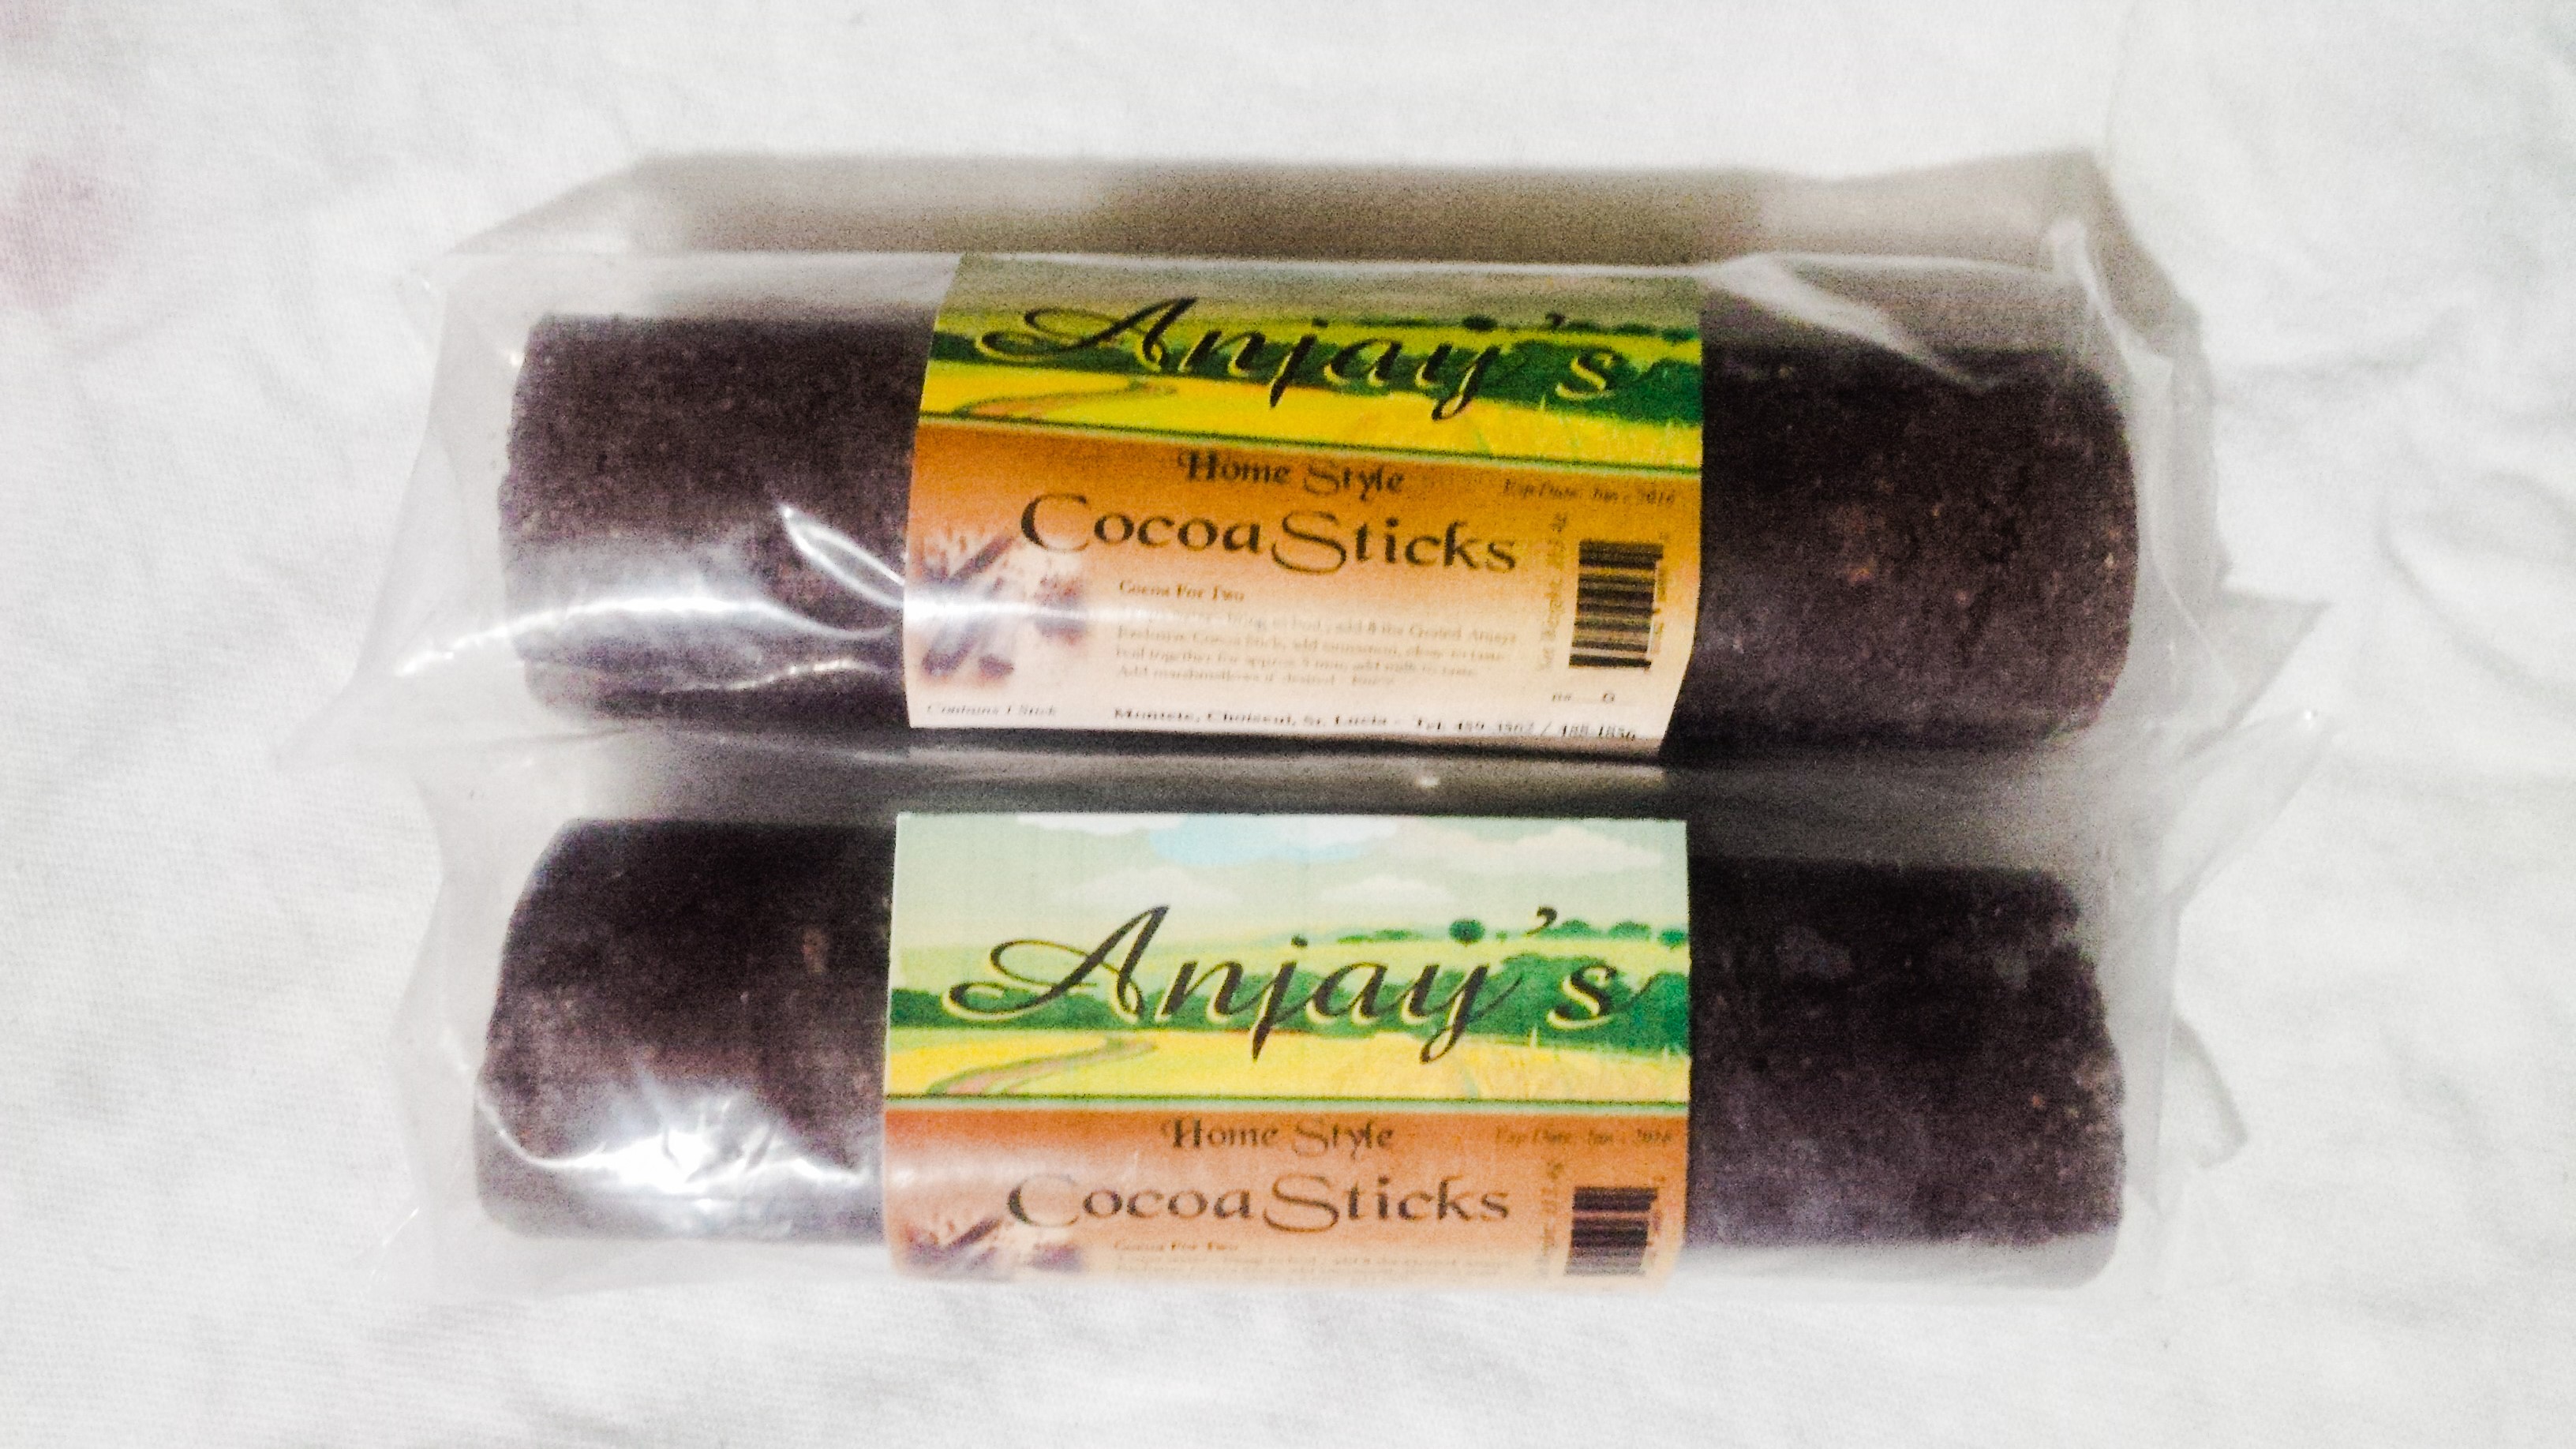 Cocoa sticks - one of the most popular products of Saint Lucian cocoa.